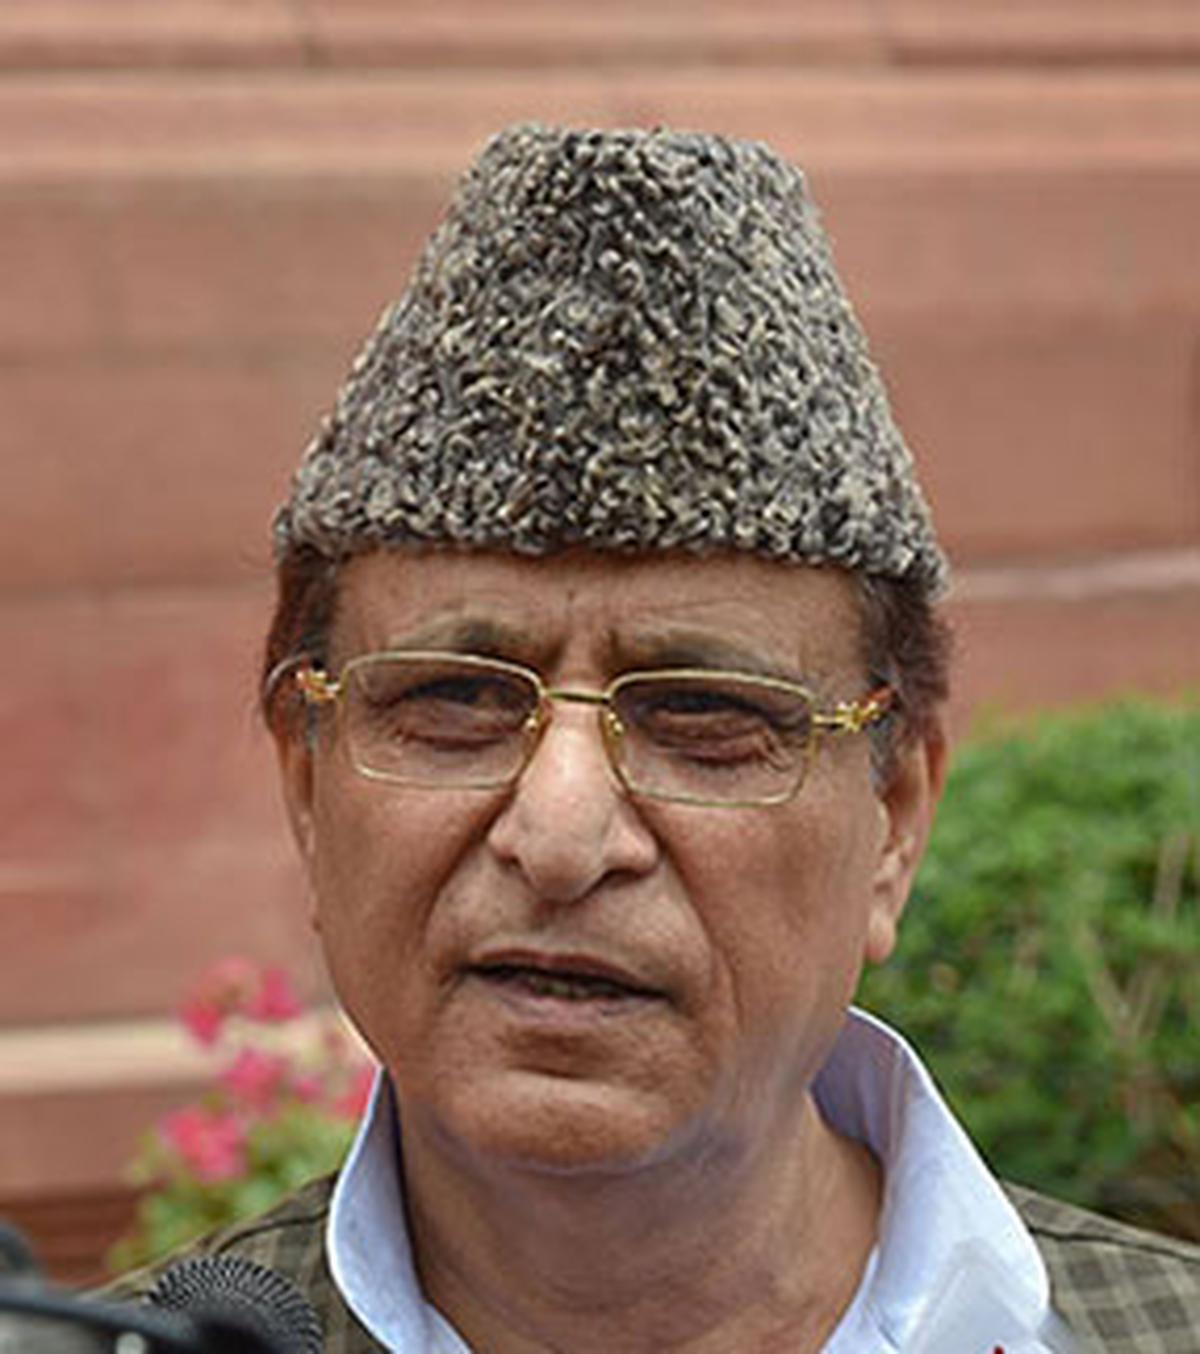 After Azam Khan’s ‘speedy’ disqualification, Opposition alleges ‘vendetta’ as roughly half of U.P. lawmakers faces cases